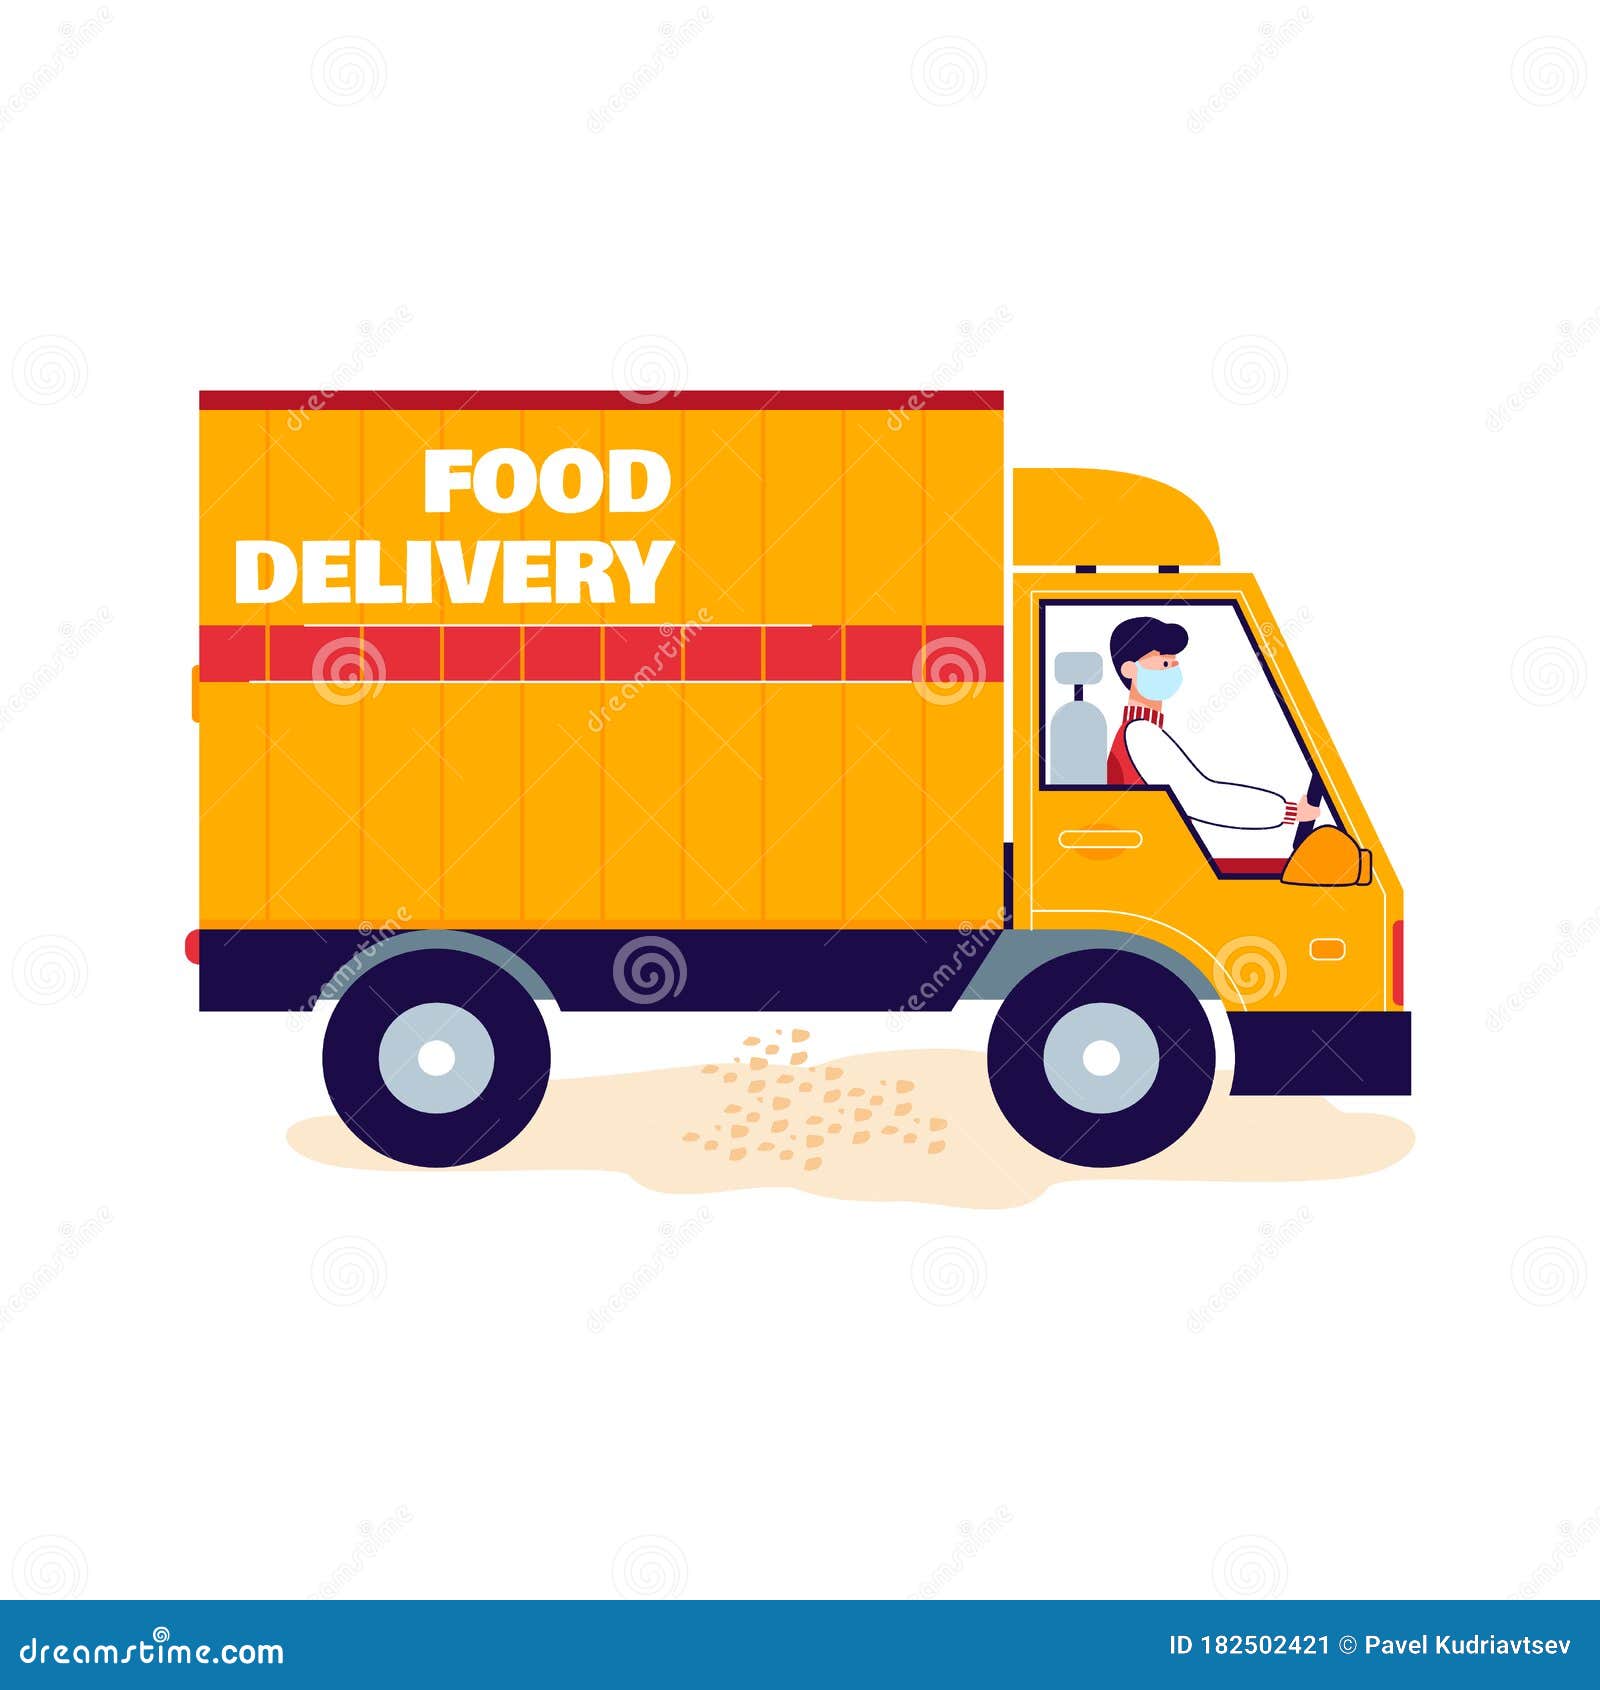 Food Delivery Truck Or Van Cartoon Icon Vector Illustration Isolated On